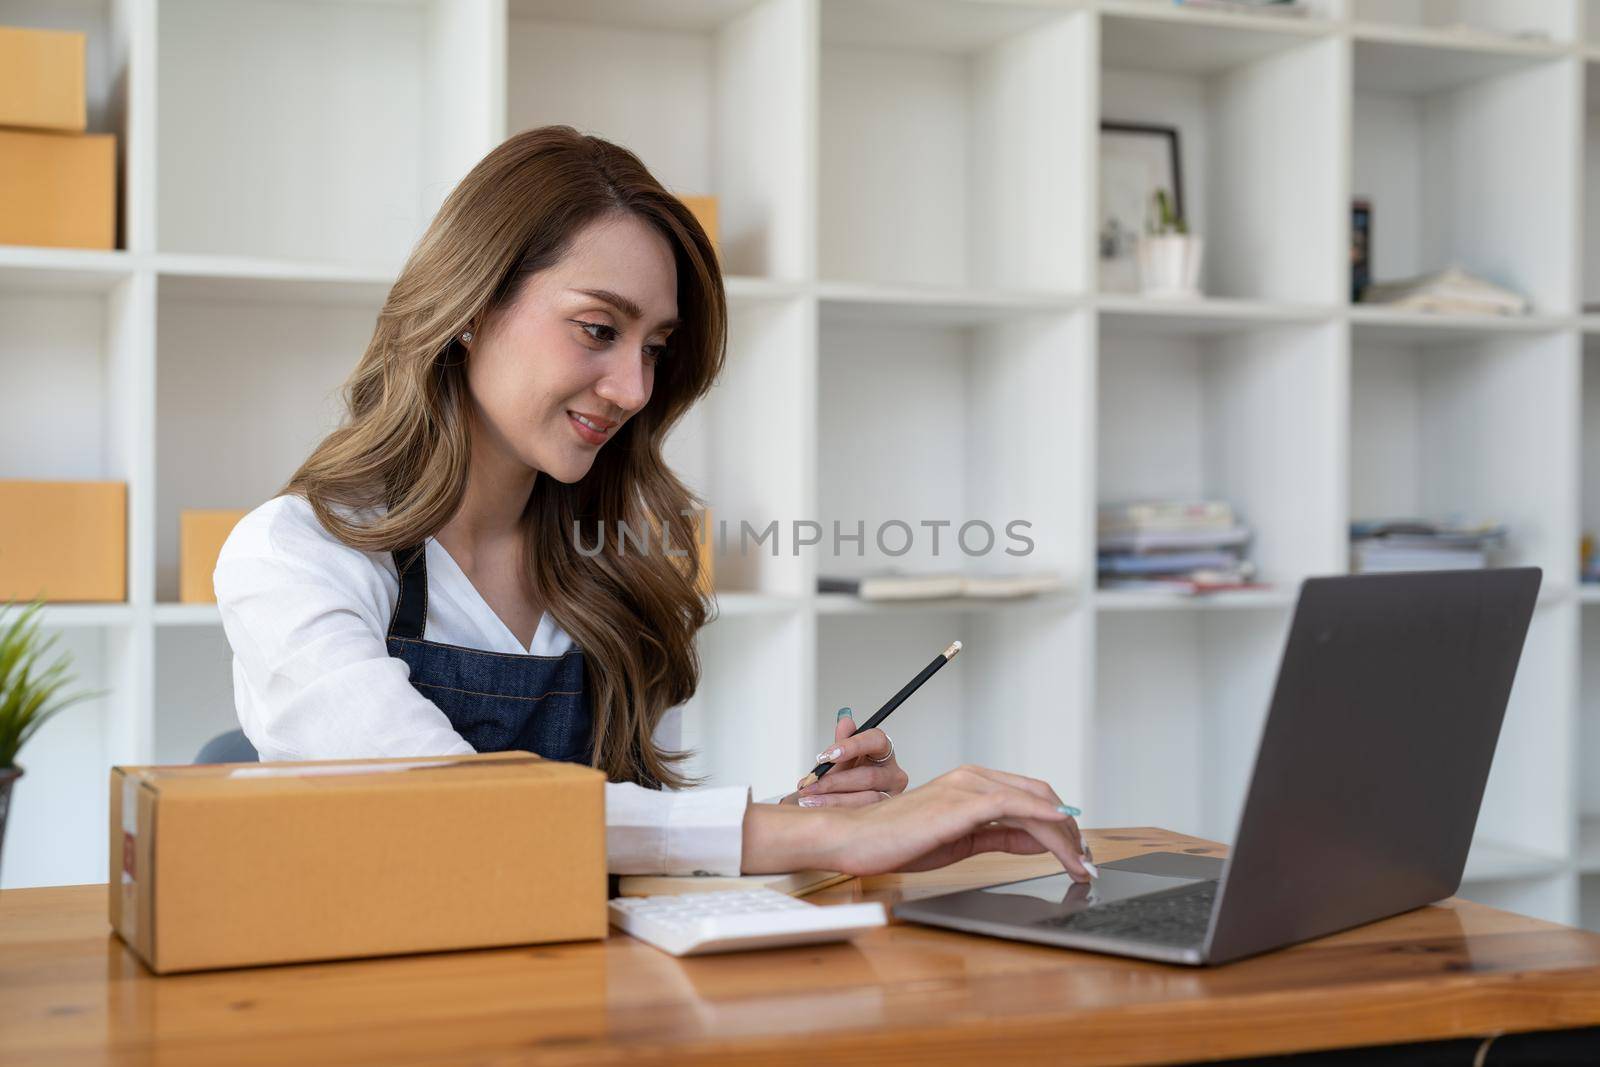 Portrait of young Asian woman working SME with a box at home the workplace.start-up small business owner, small business entrepreneur SME or freelance business online and delivery concept